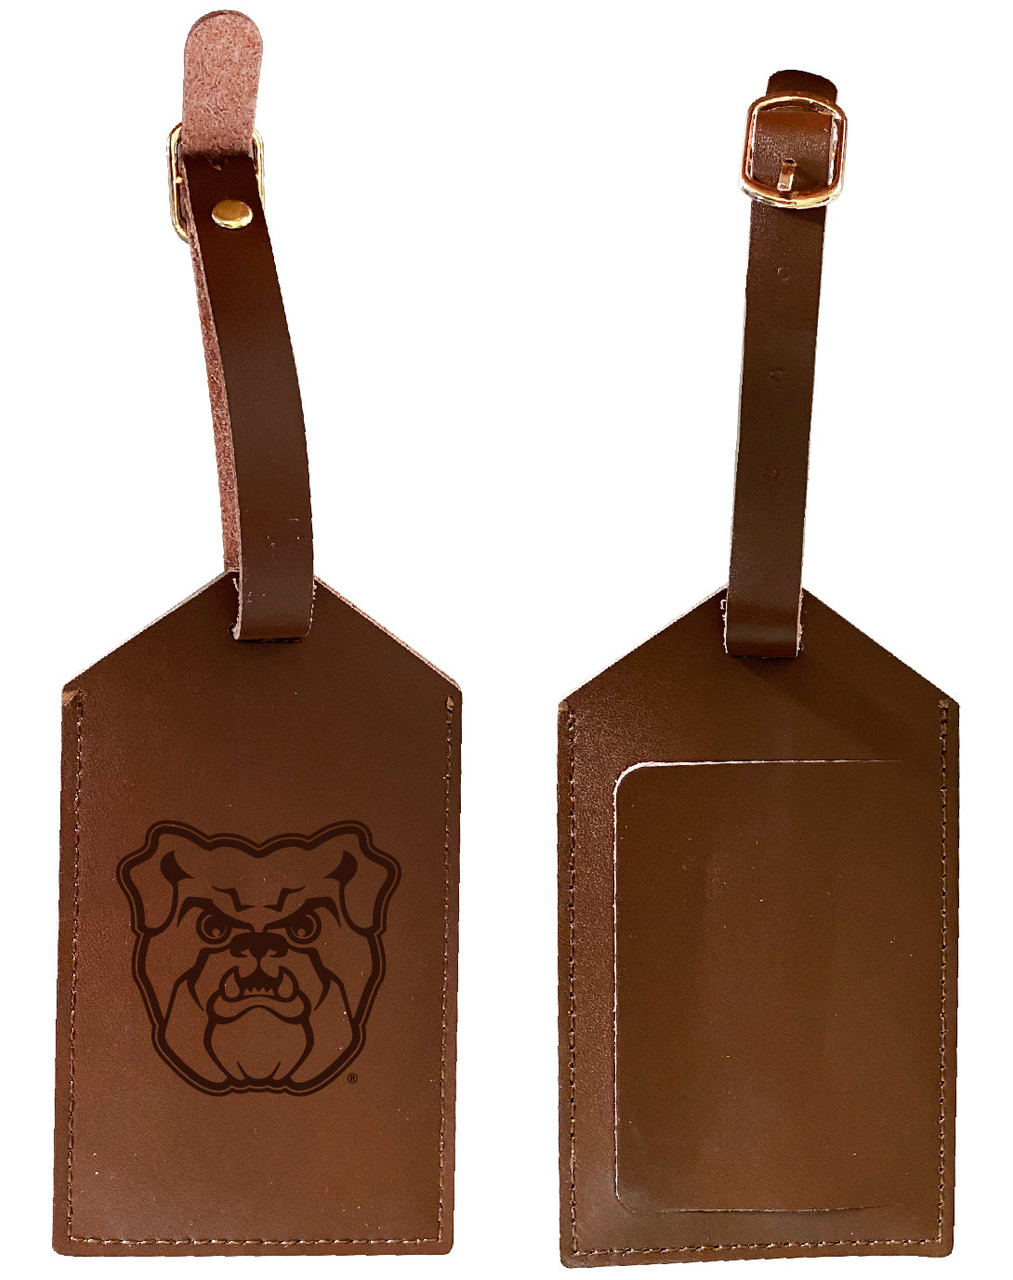 Butler Bulldogs Leather Luggage Tag Engraved